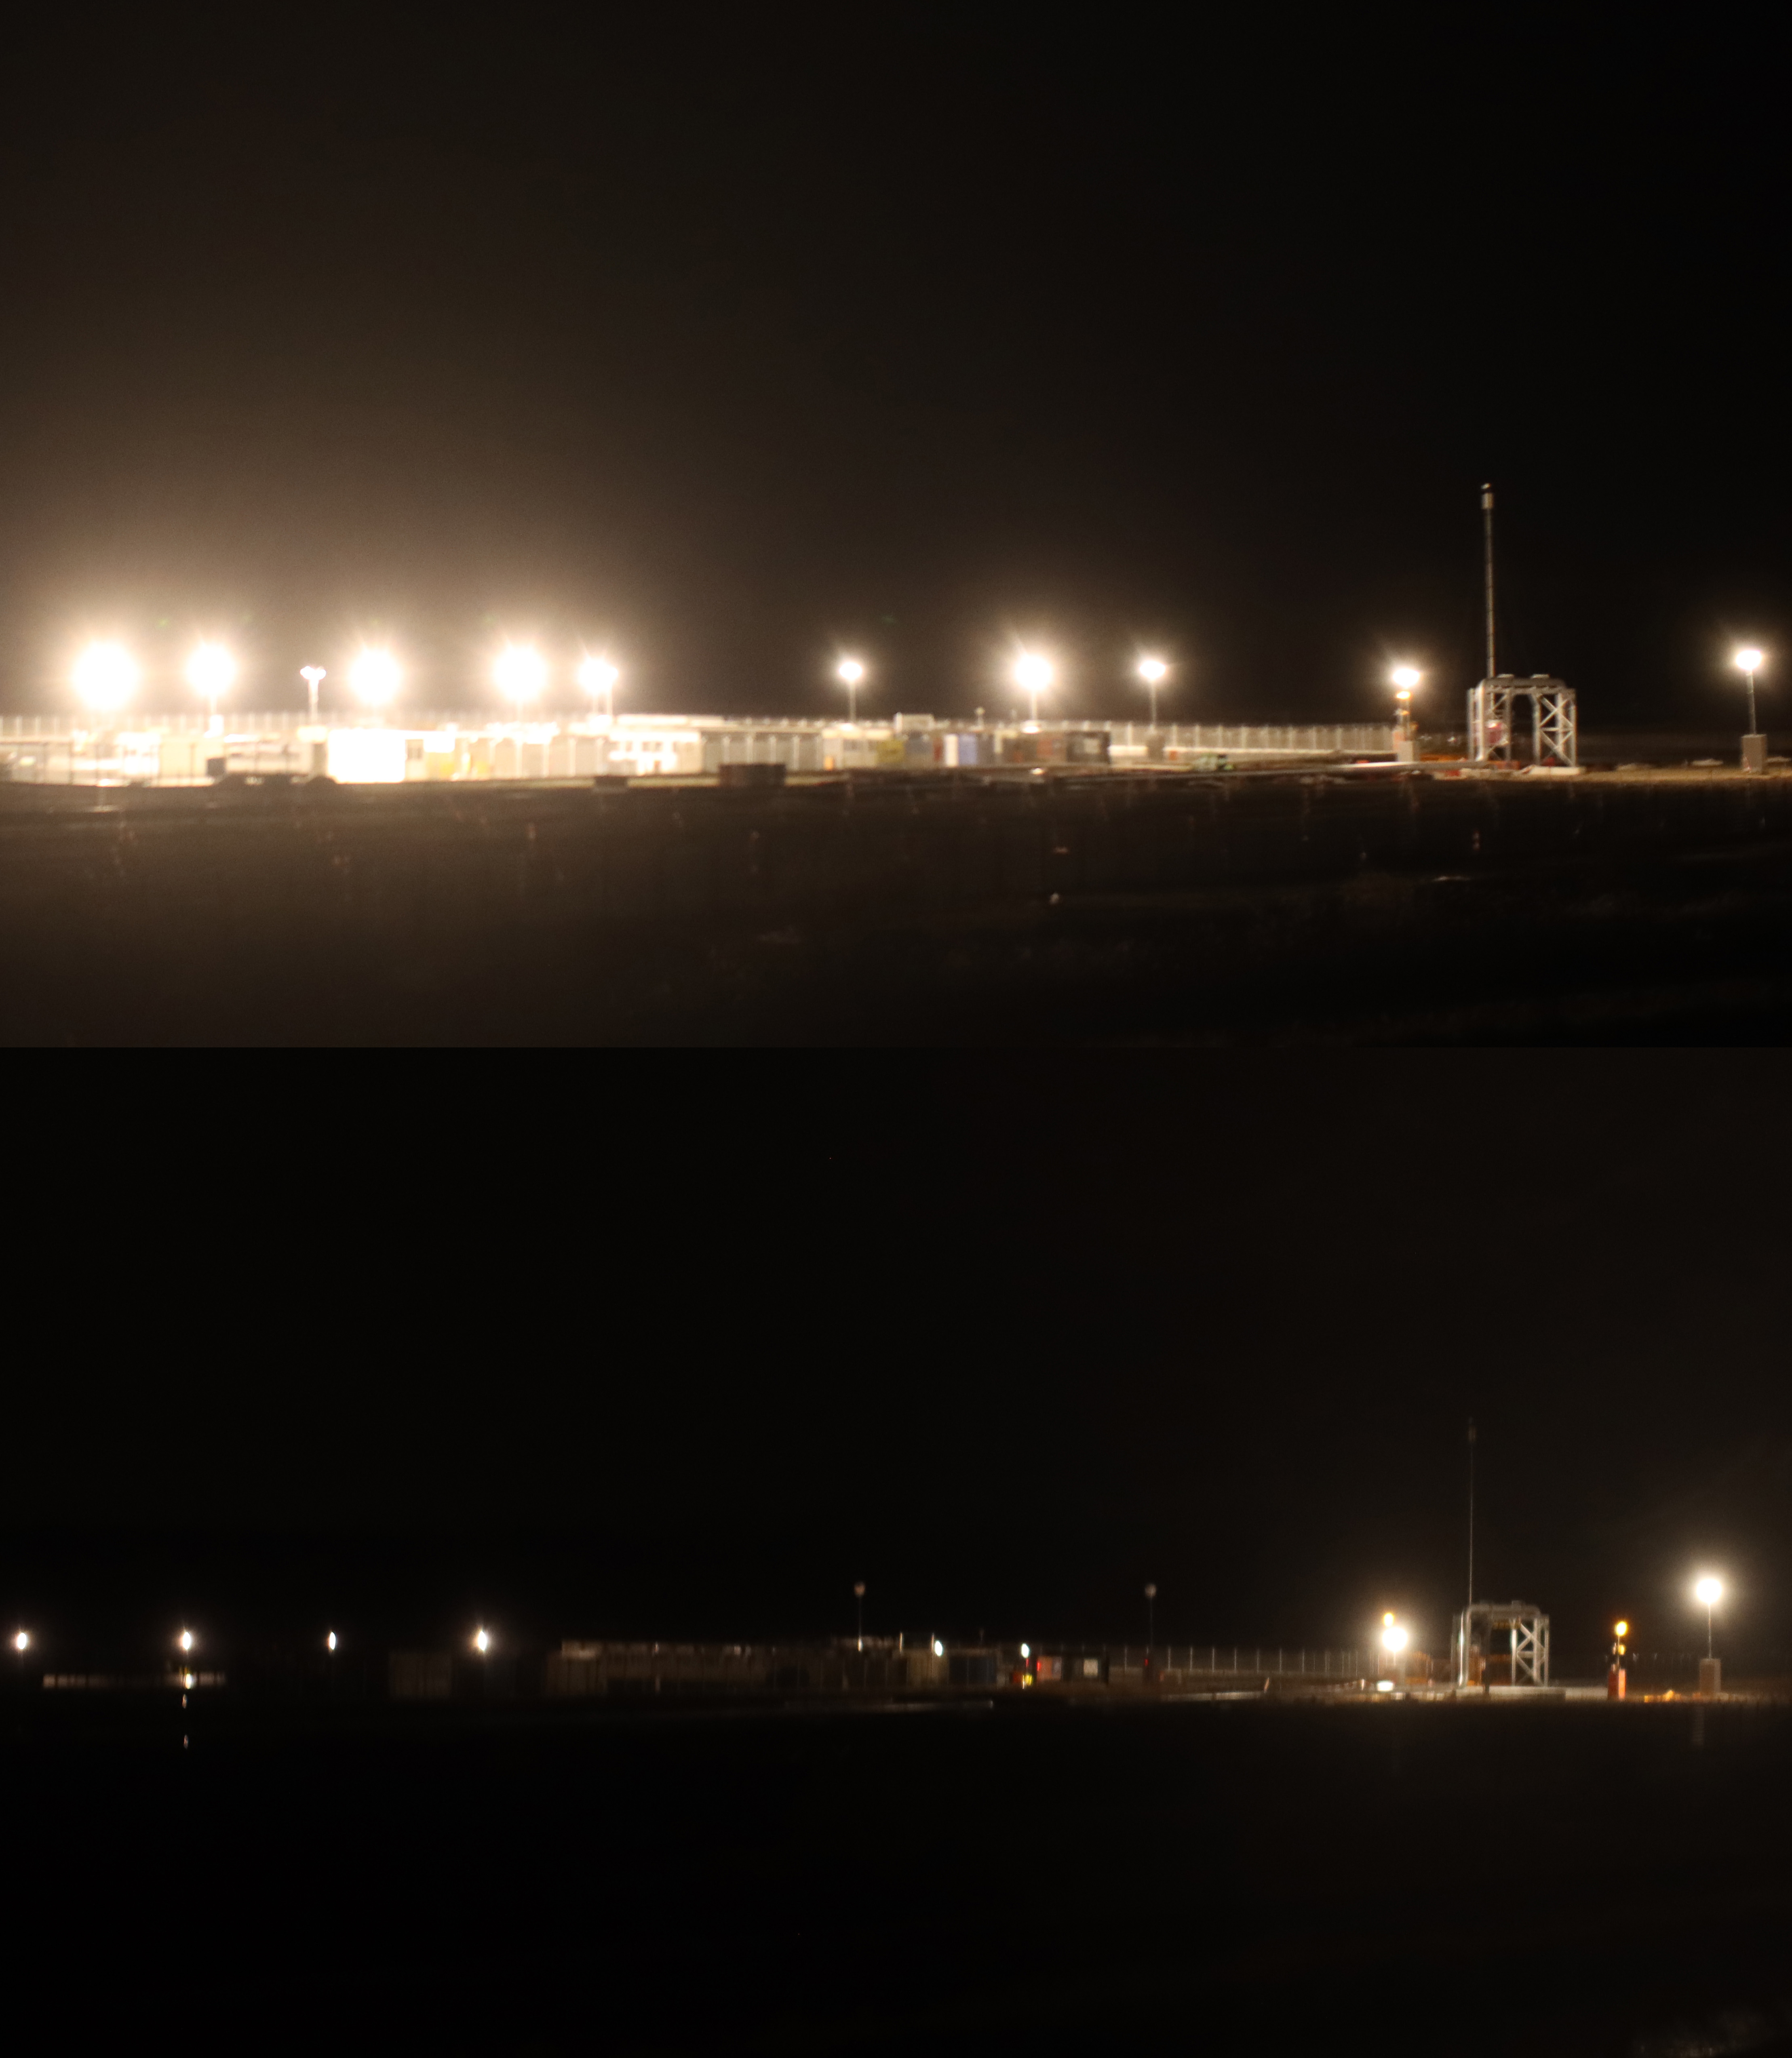 Figure 4: Comparing photos of the distribution station before (above, 27.02.23) and after (below, 08.02.24) the light reduction (ISO 1600, f/1.8, 1/20 s), Andreas Hänel